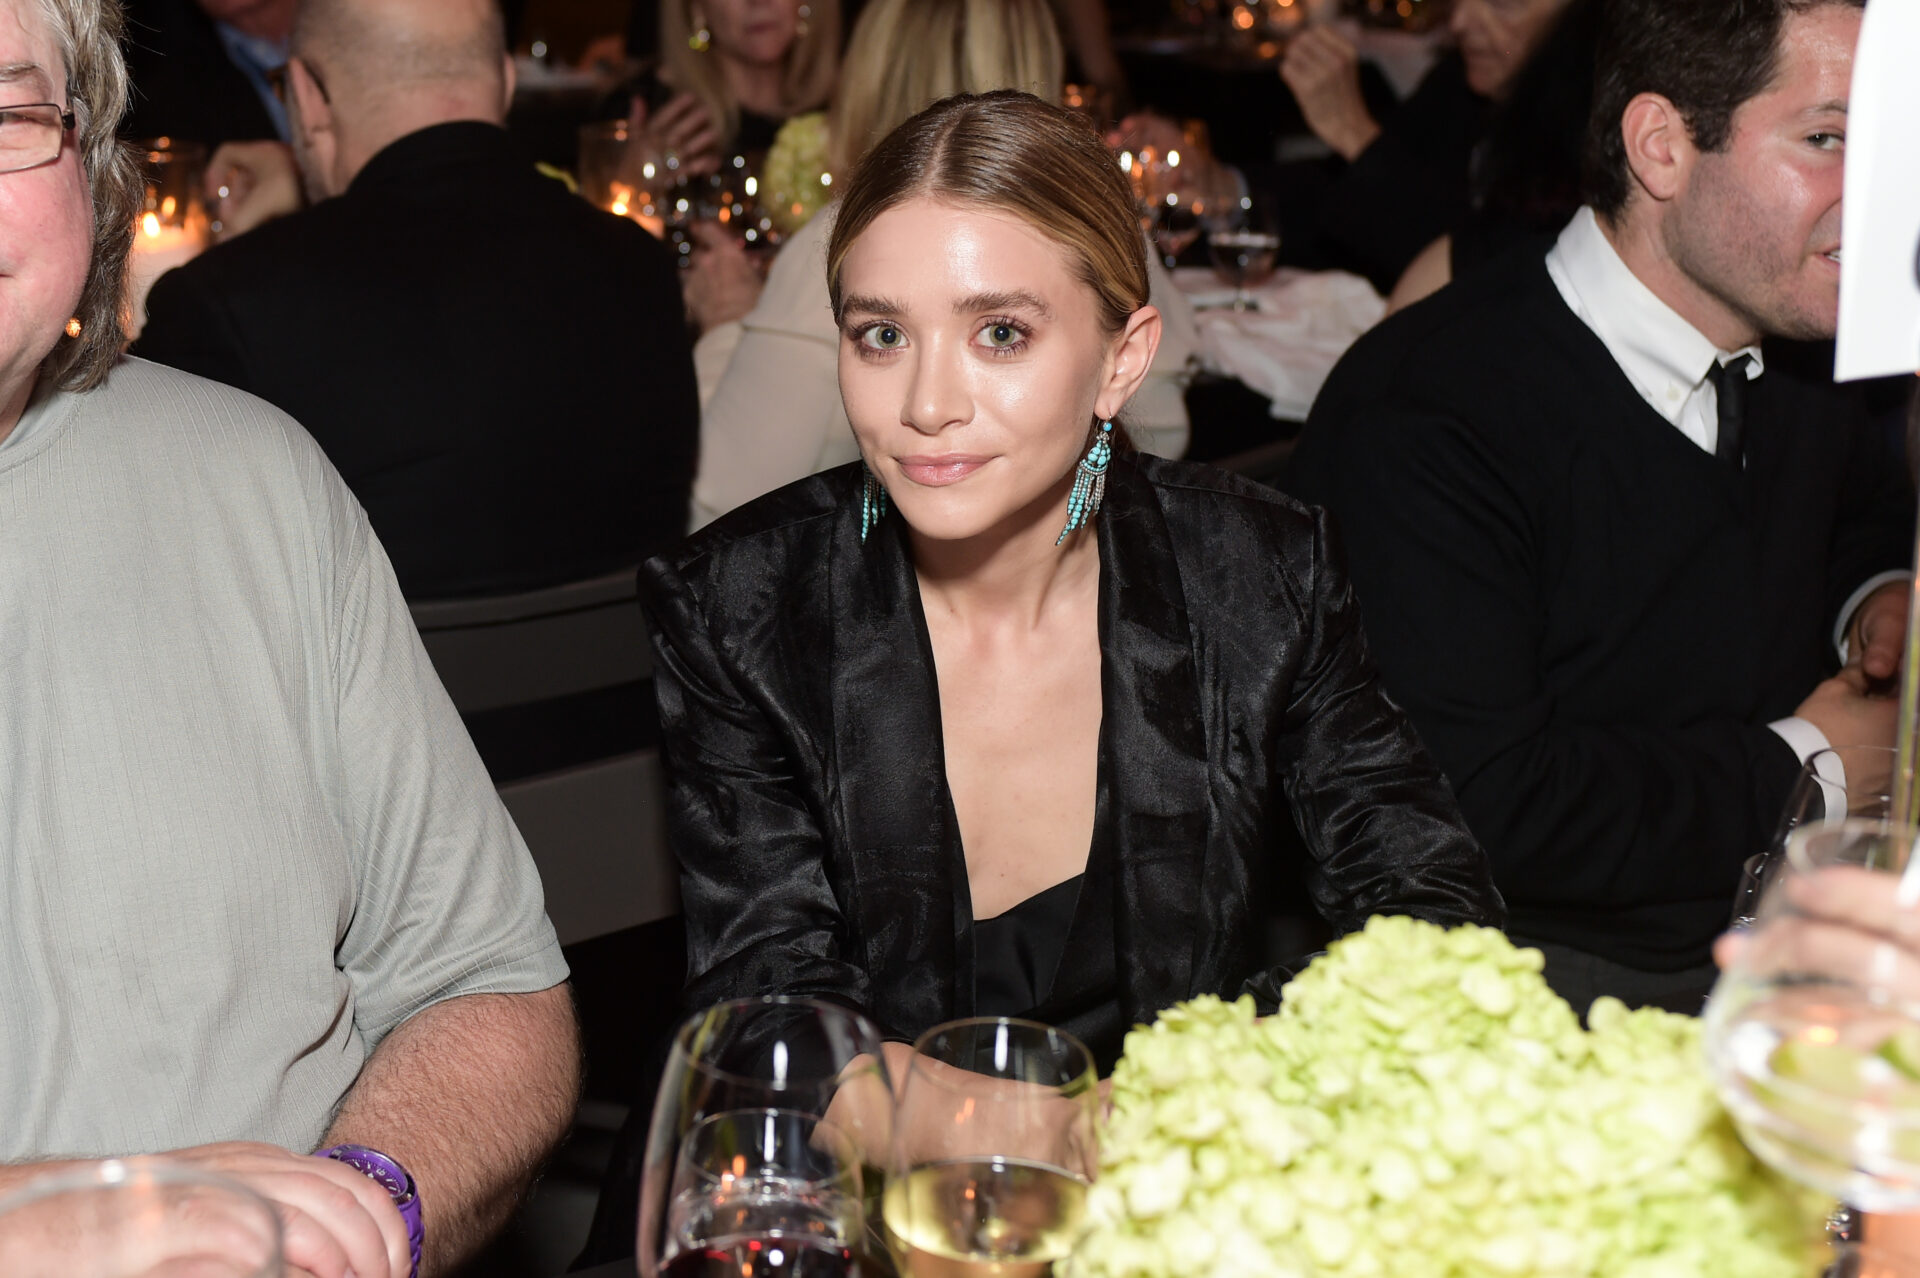 WESTWOOD, CA - OCTOBER 12: Ashley Olsen attends Hammer Museum 12th Annual Gala In The Garden With Generous Support From Bottega Veneta on October 12, 2014 in Westwood, California. (Photo by Stefanie Keenan/Getty Images for Hammer Museum)